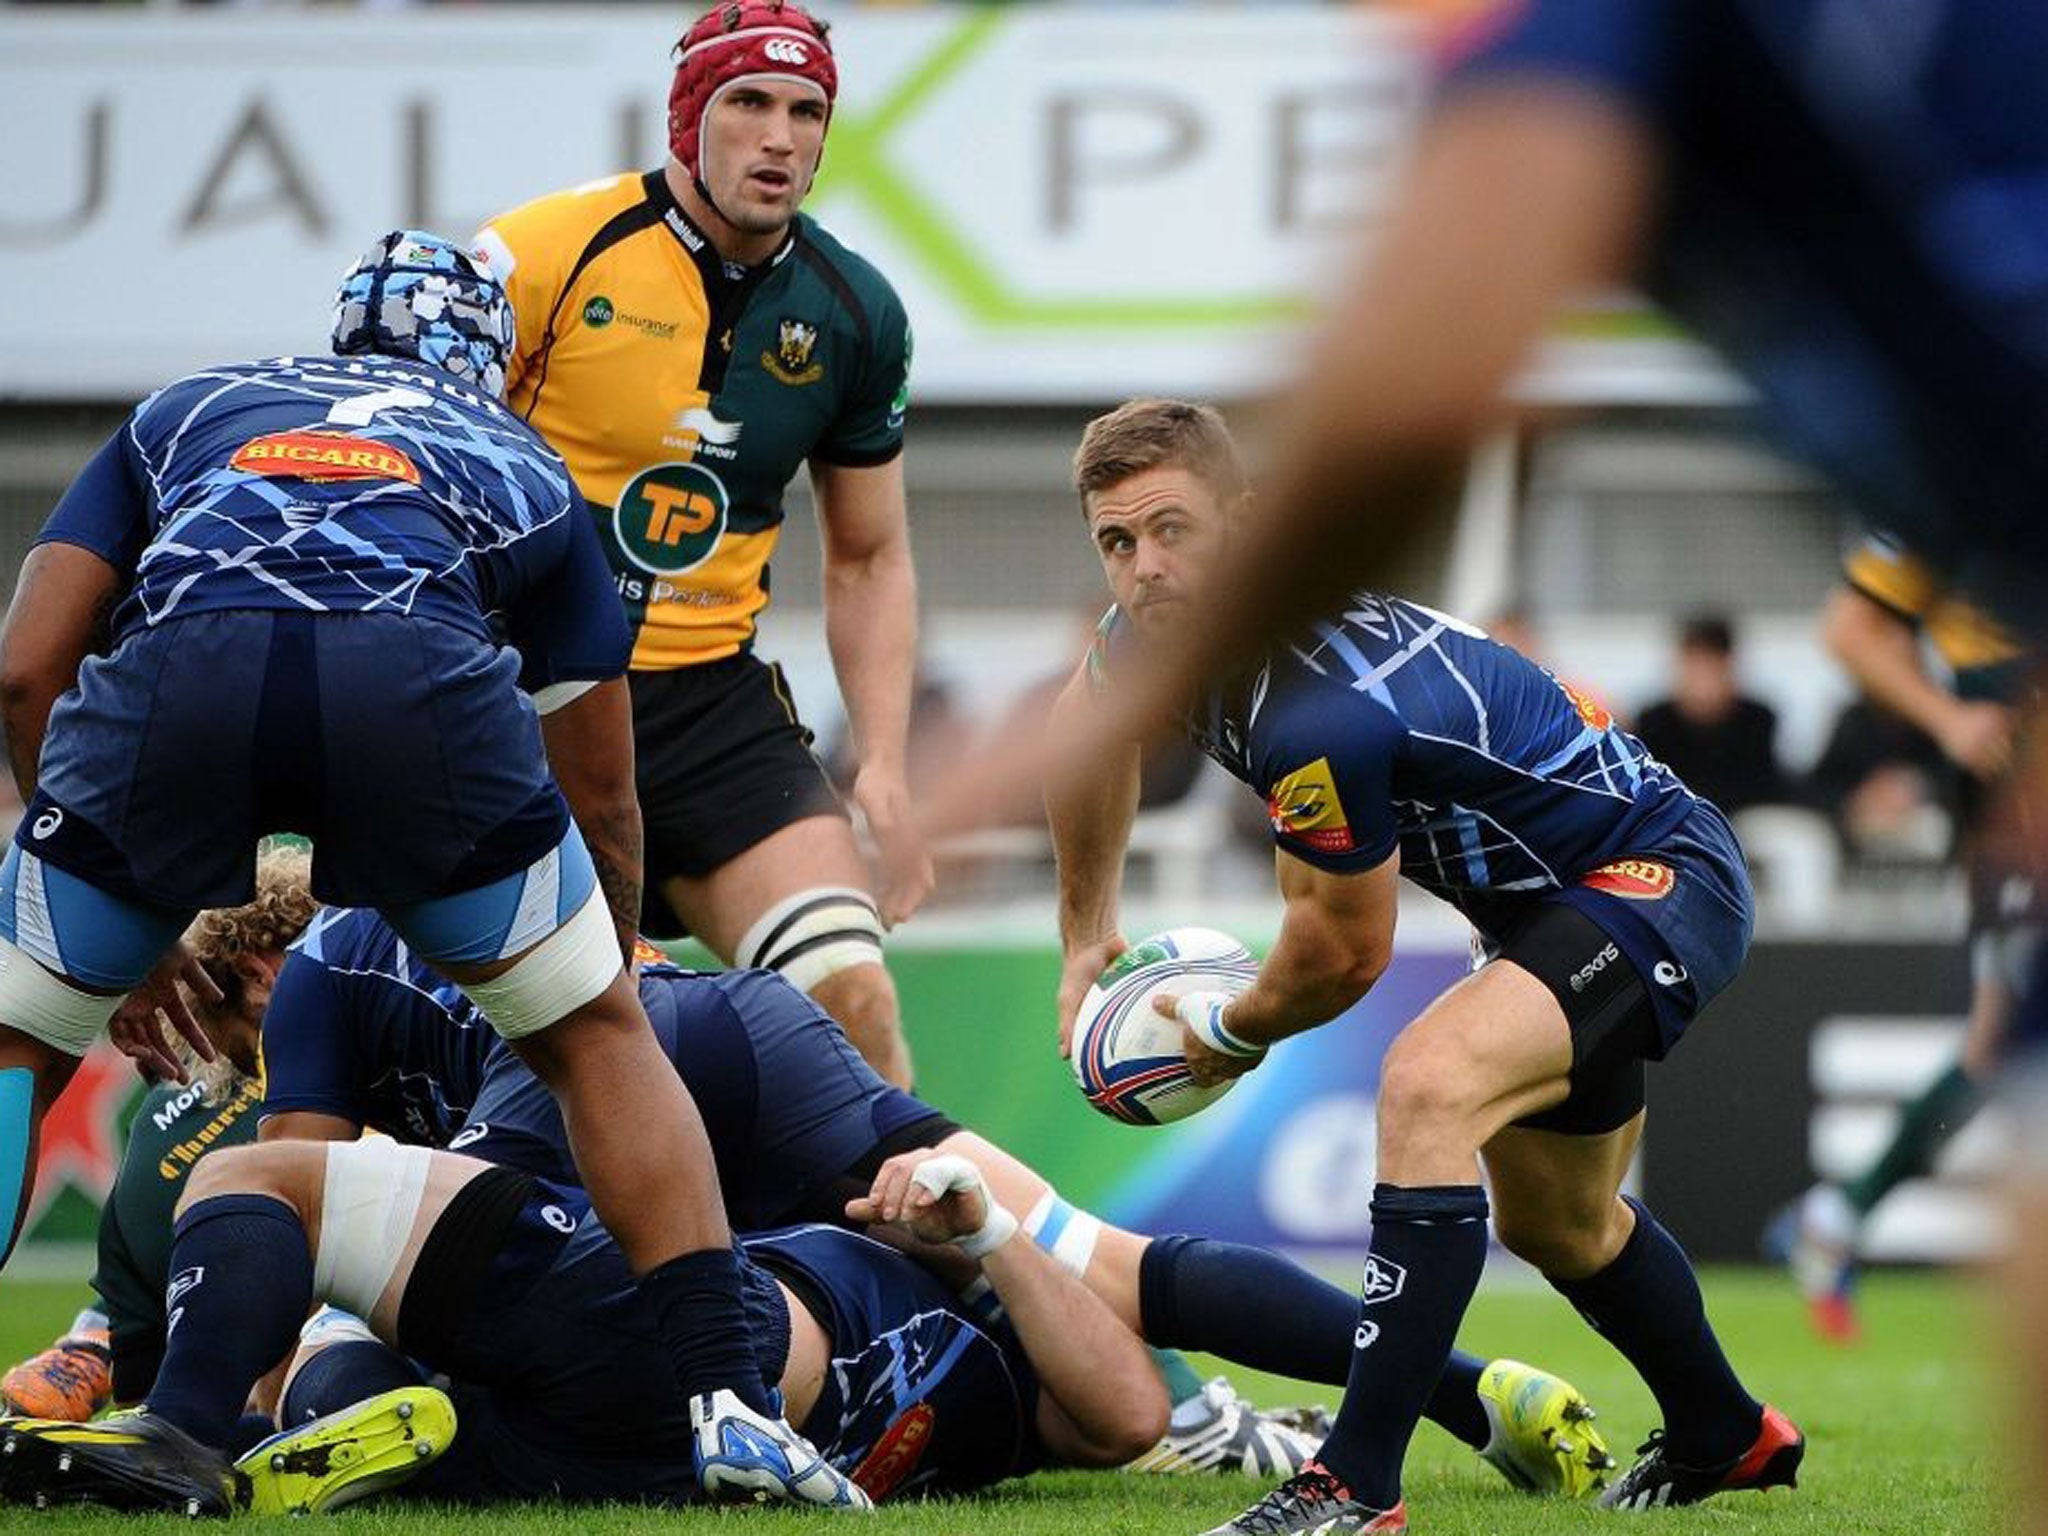 Castres' South African scrum-half Rory Kockott passes the ball